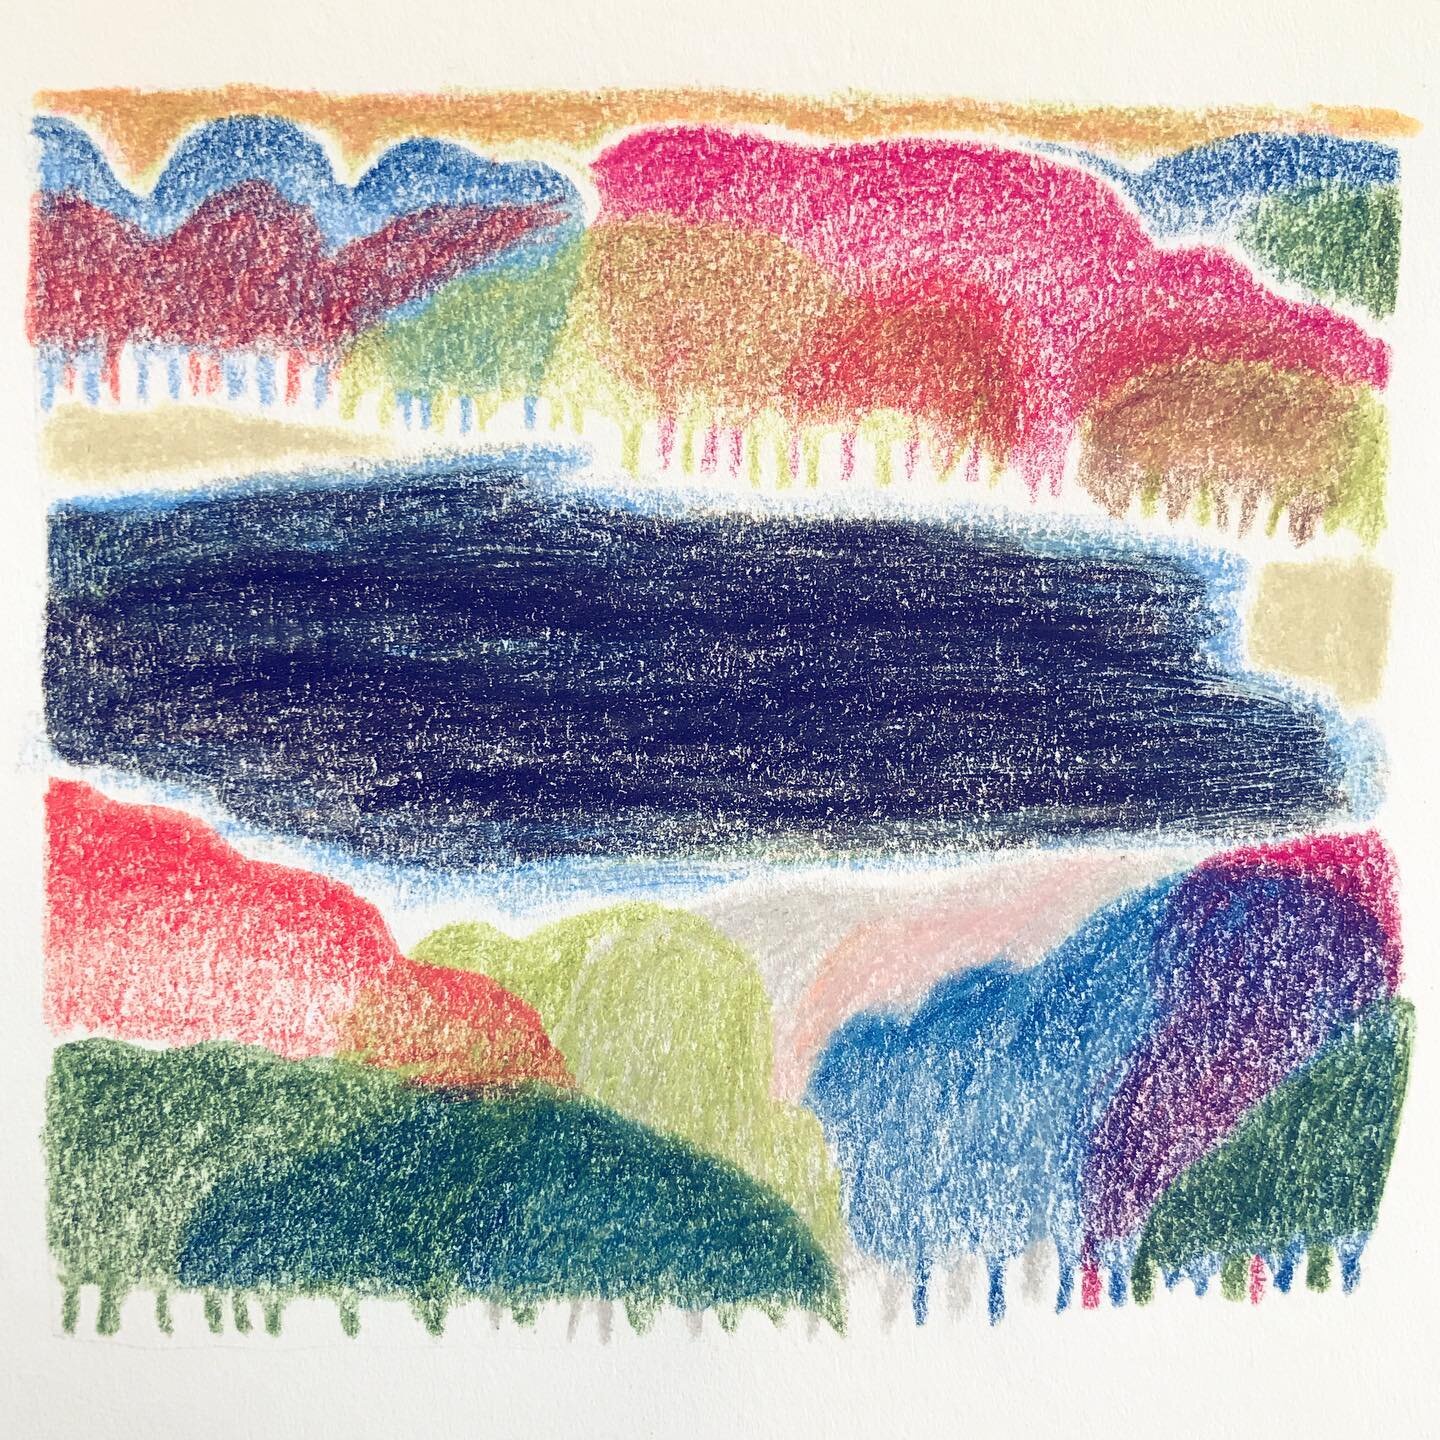 Fiddlin&rsquo; with color and layers, probably my favorite kind of fiddlin&rsquo;.

#noOffenseYoYoMa #practice #exercise #dailyart #sketch #tincupdesign #color #layers #coloredpencil #trees